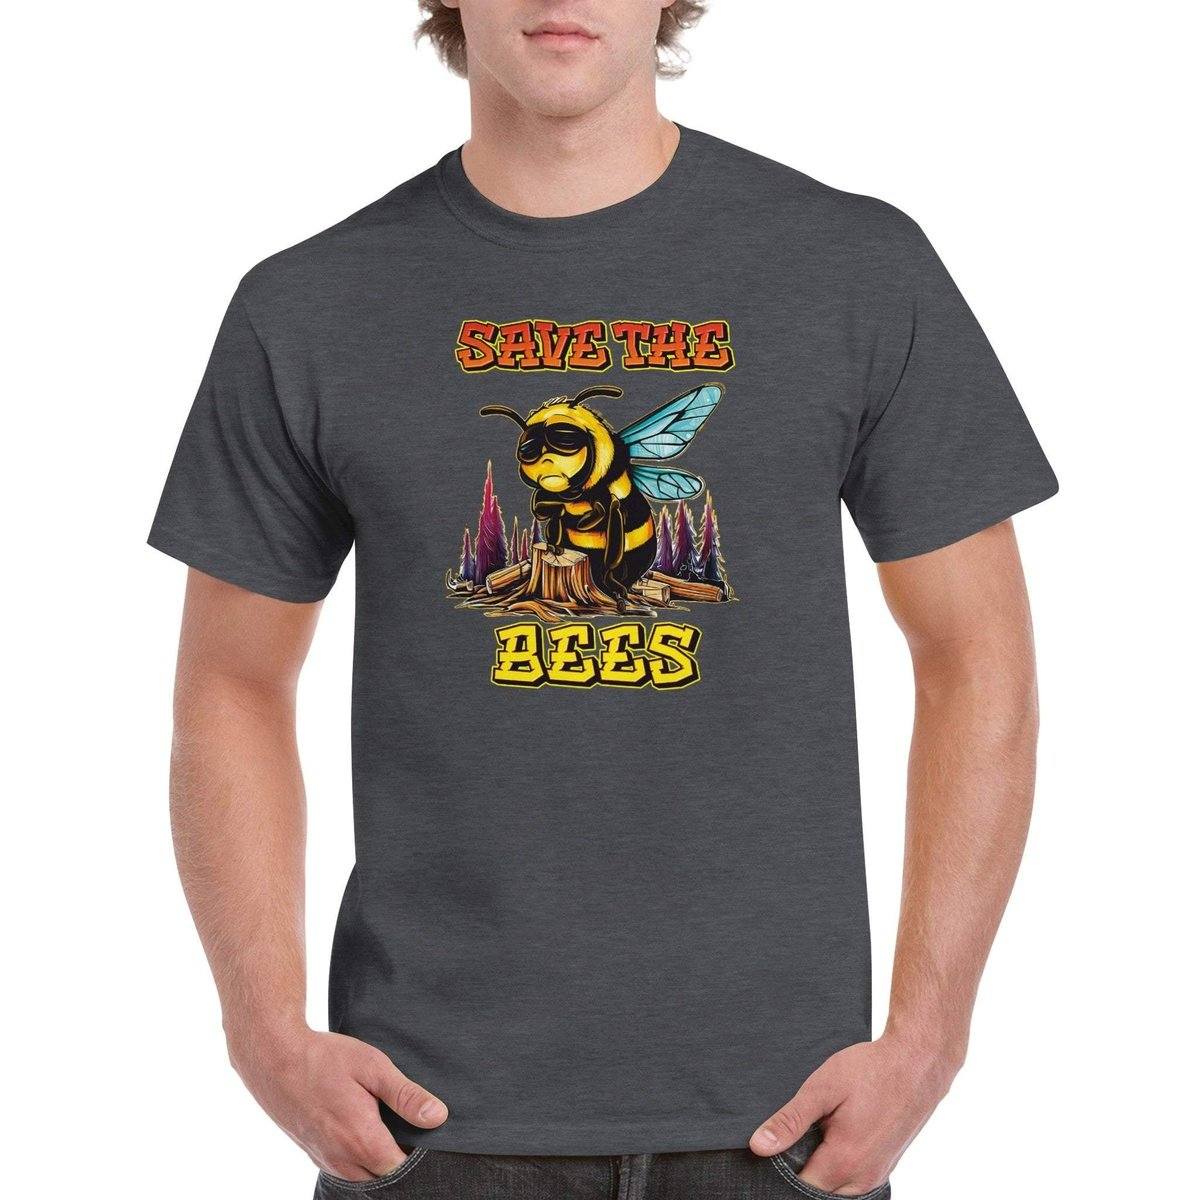 Save The Bees Tshirt - Crying Bee - Unisex Crewneck T-shirt Australia Online Color